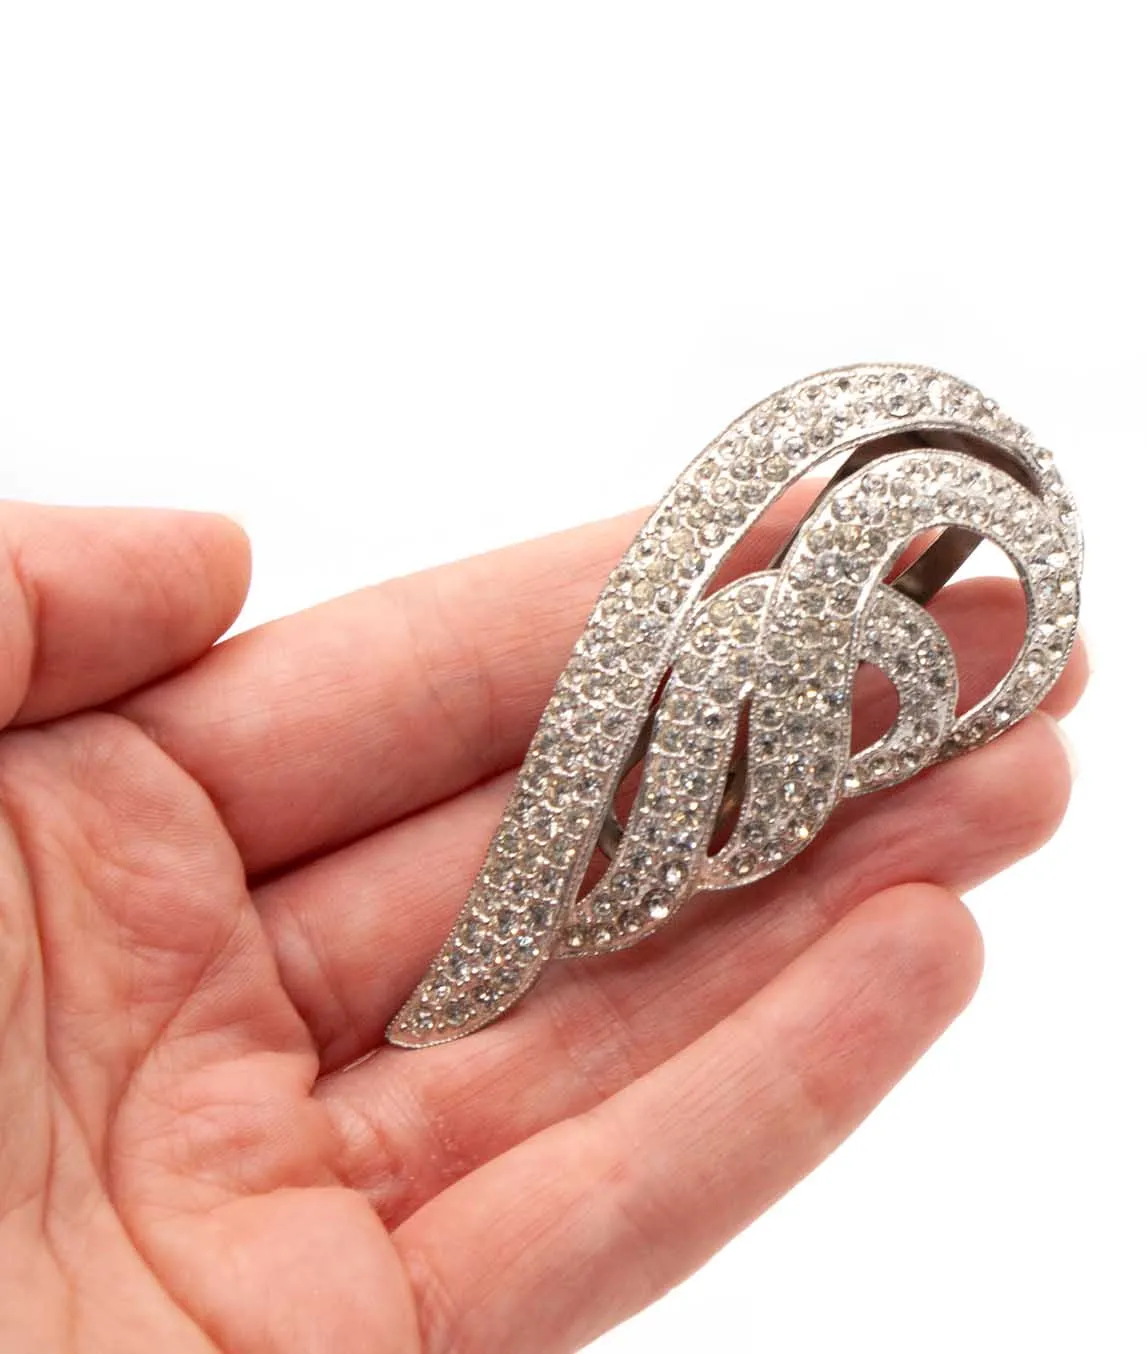 Wing shaped crystal dress clip held in hand